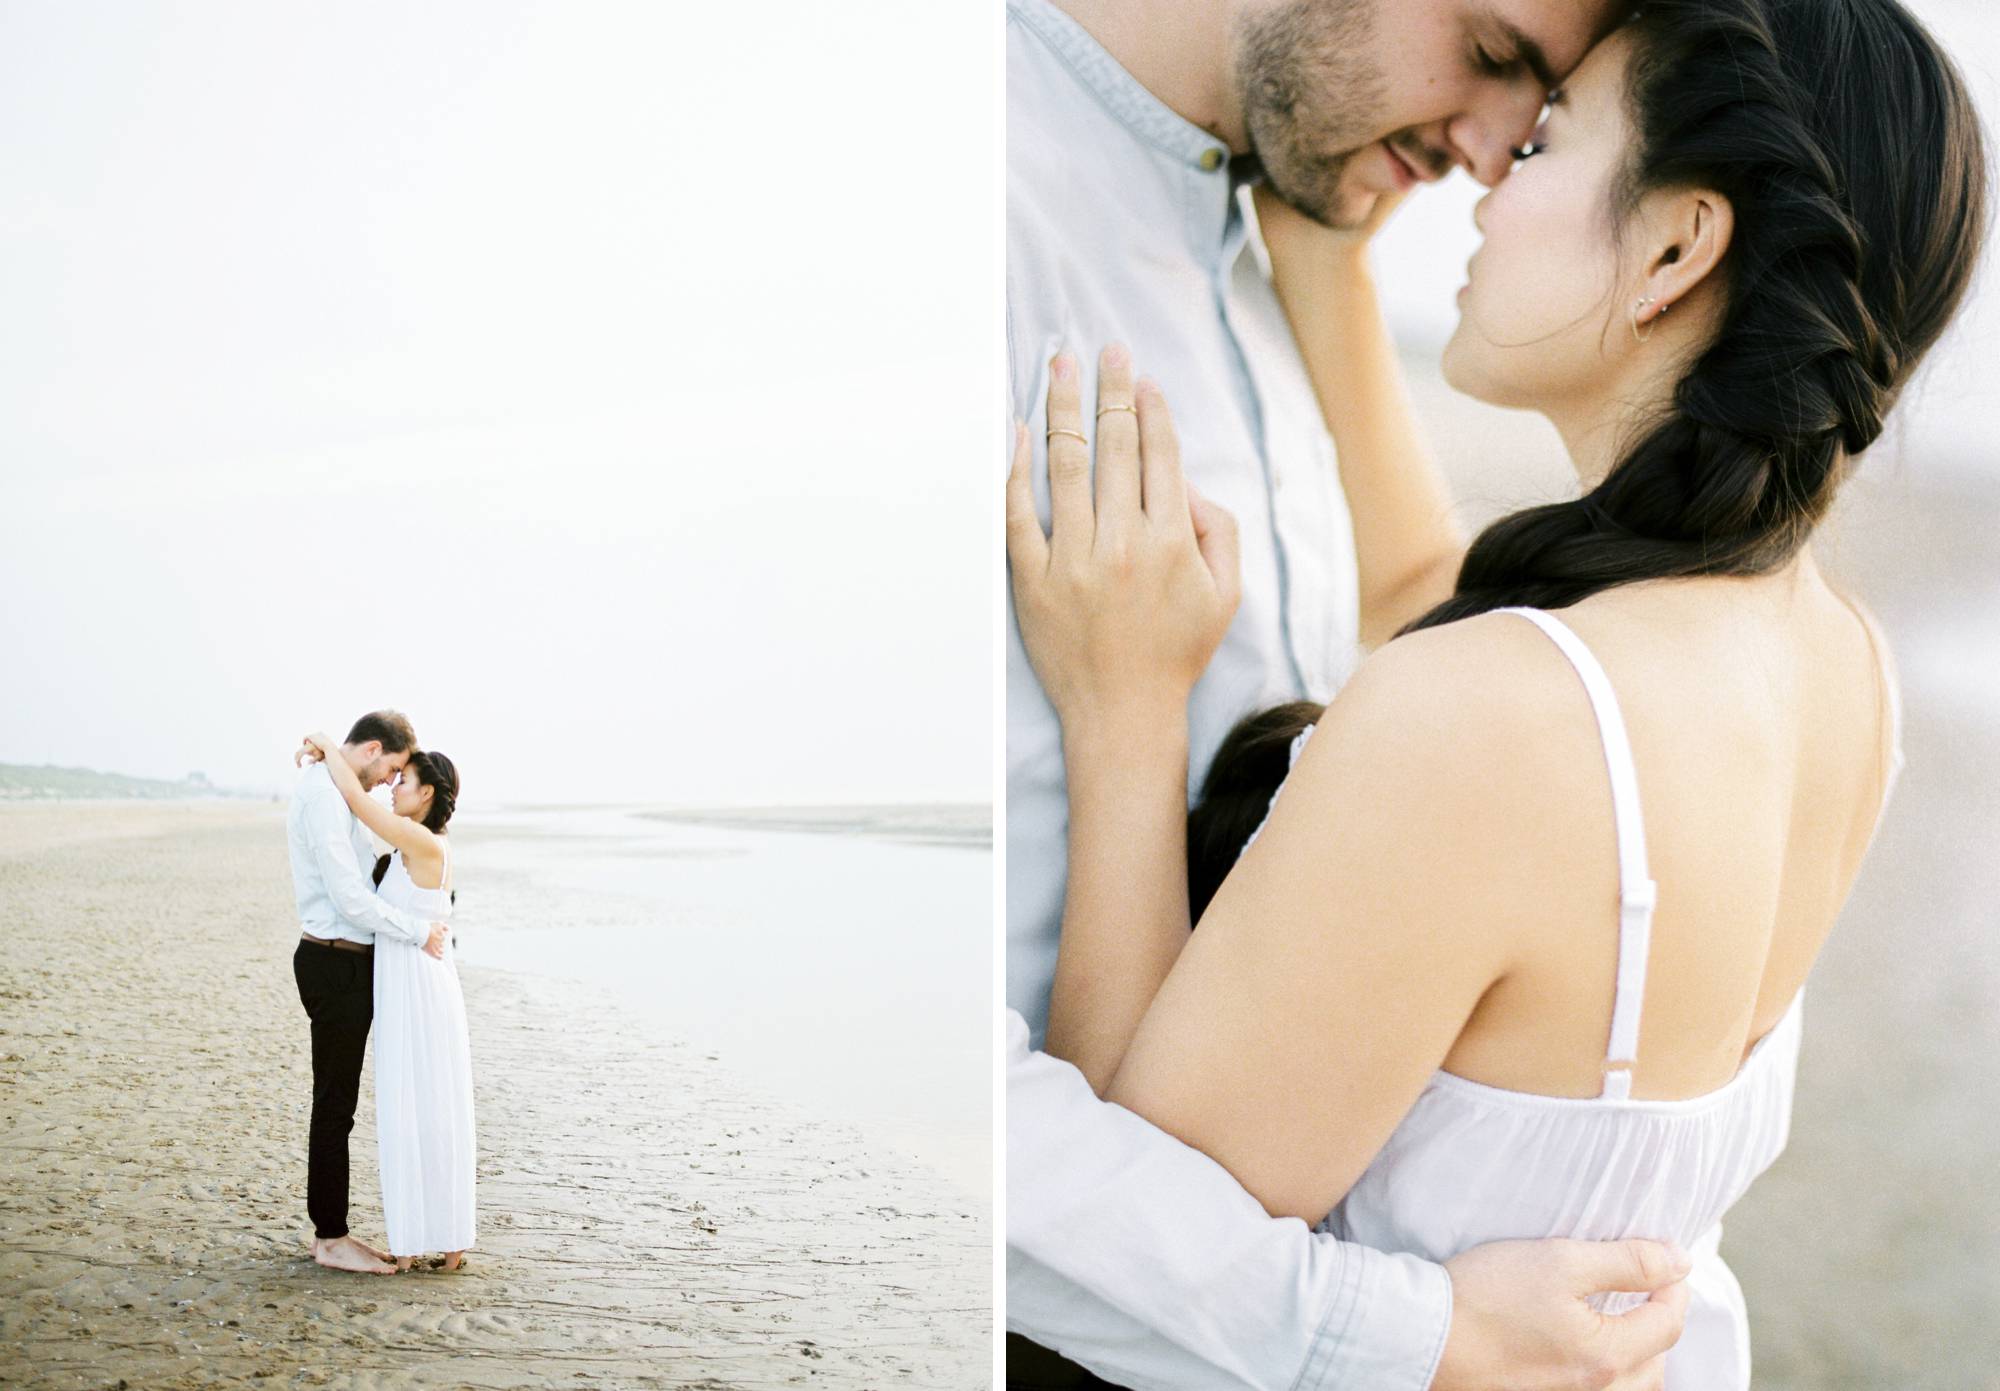 Intimate engagement shoot at the beach in Bloemendaal